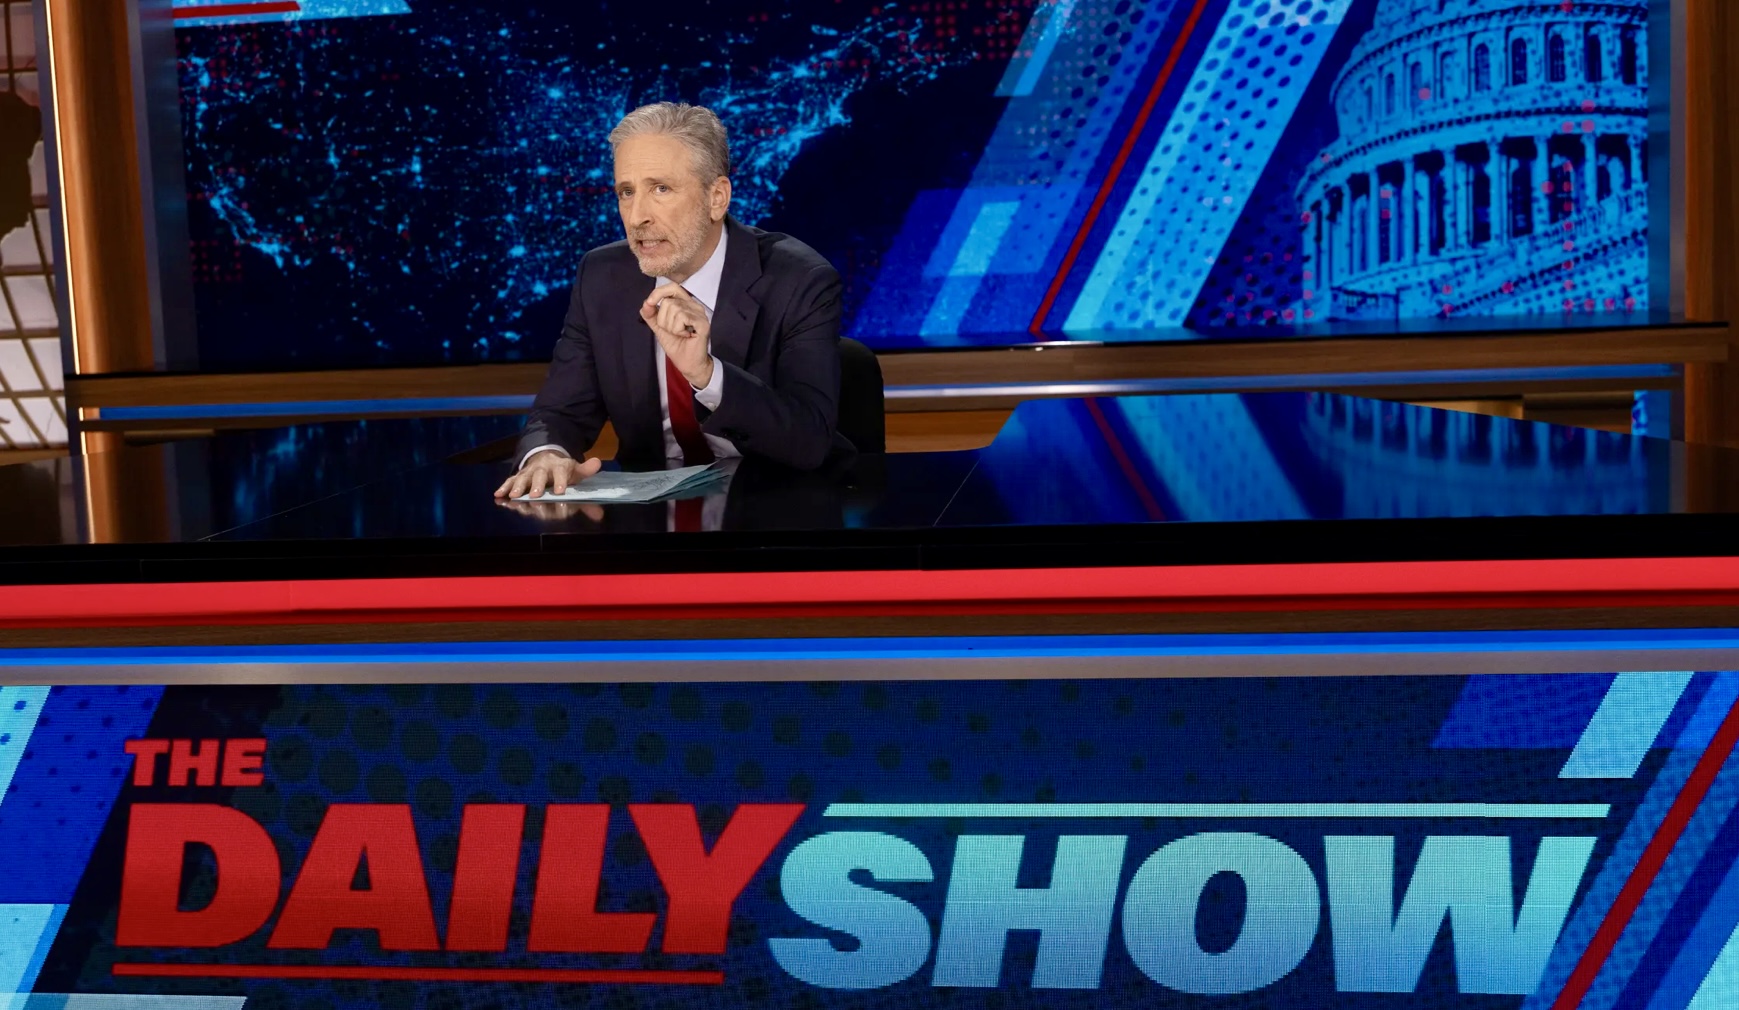 The Daily Show is #1 on streaming following return of Jon Stewart